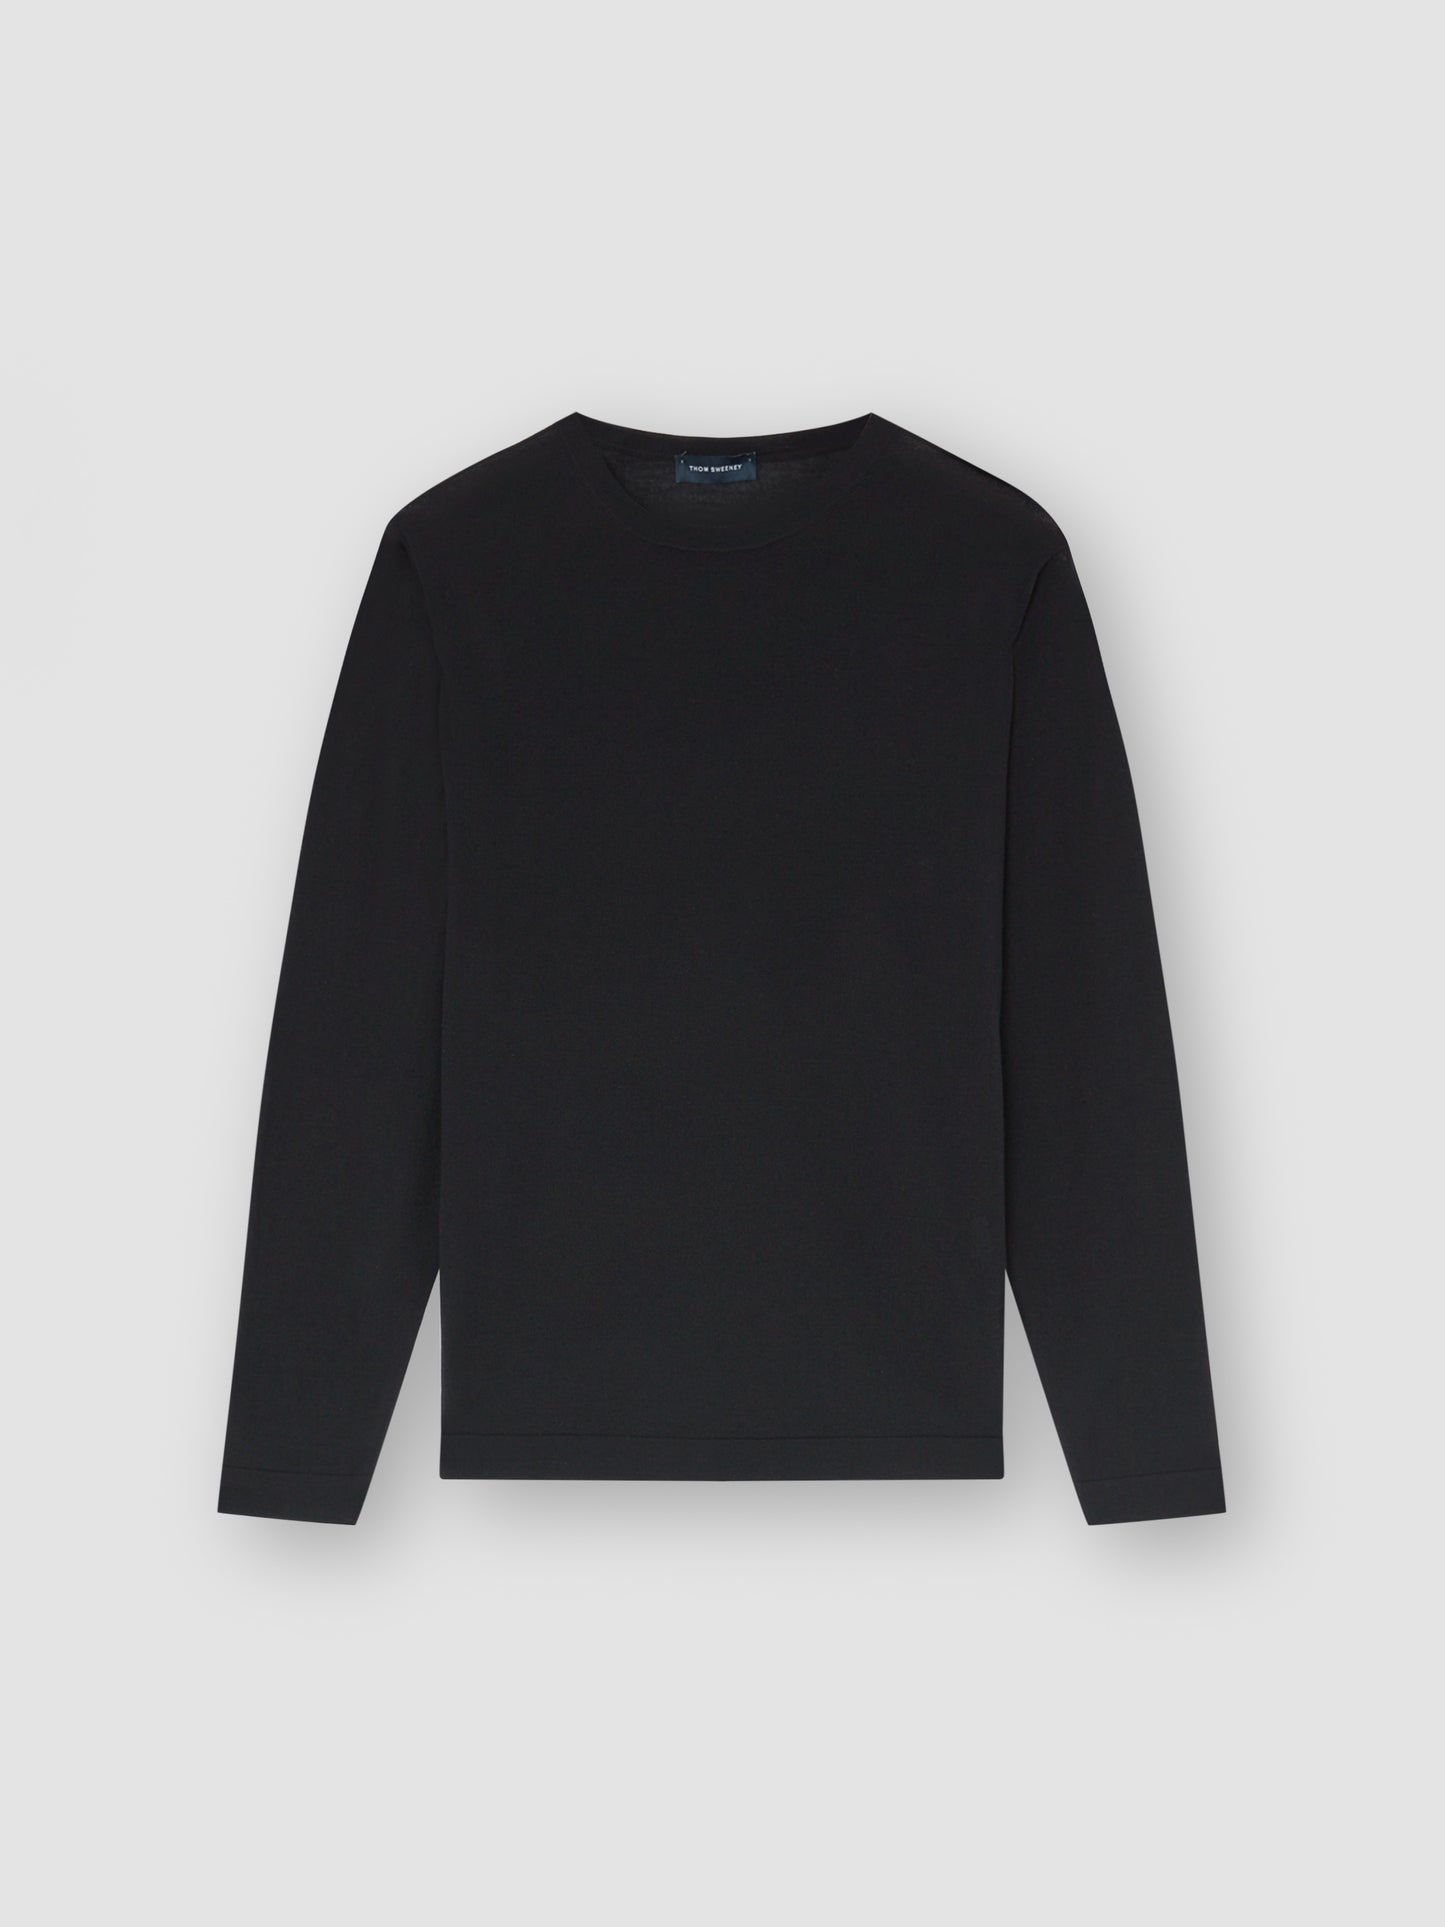 Wool Long Sleeve Relaxed Fit T-Shirt Navy Product Image